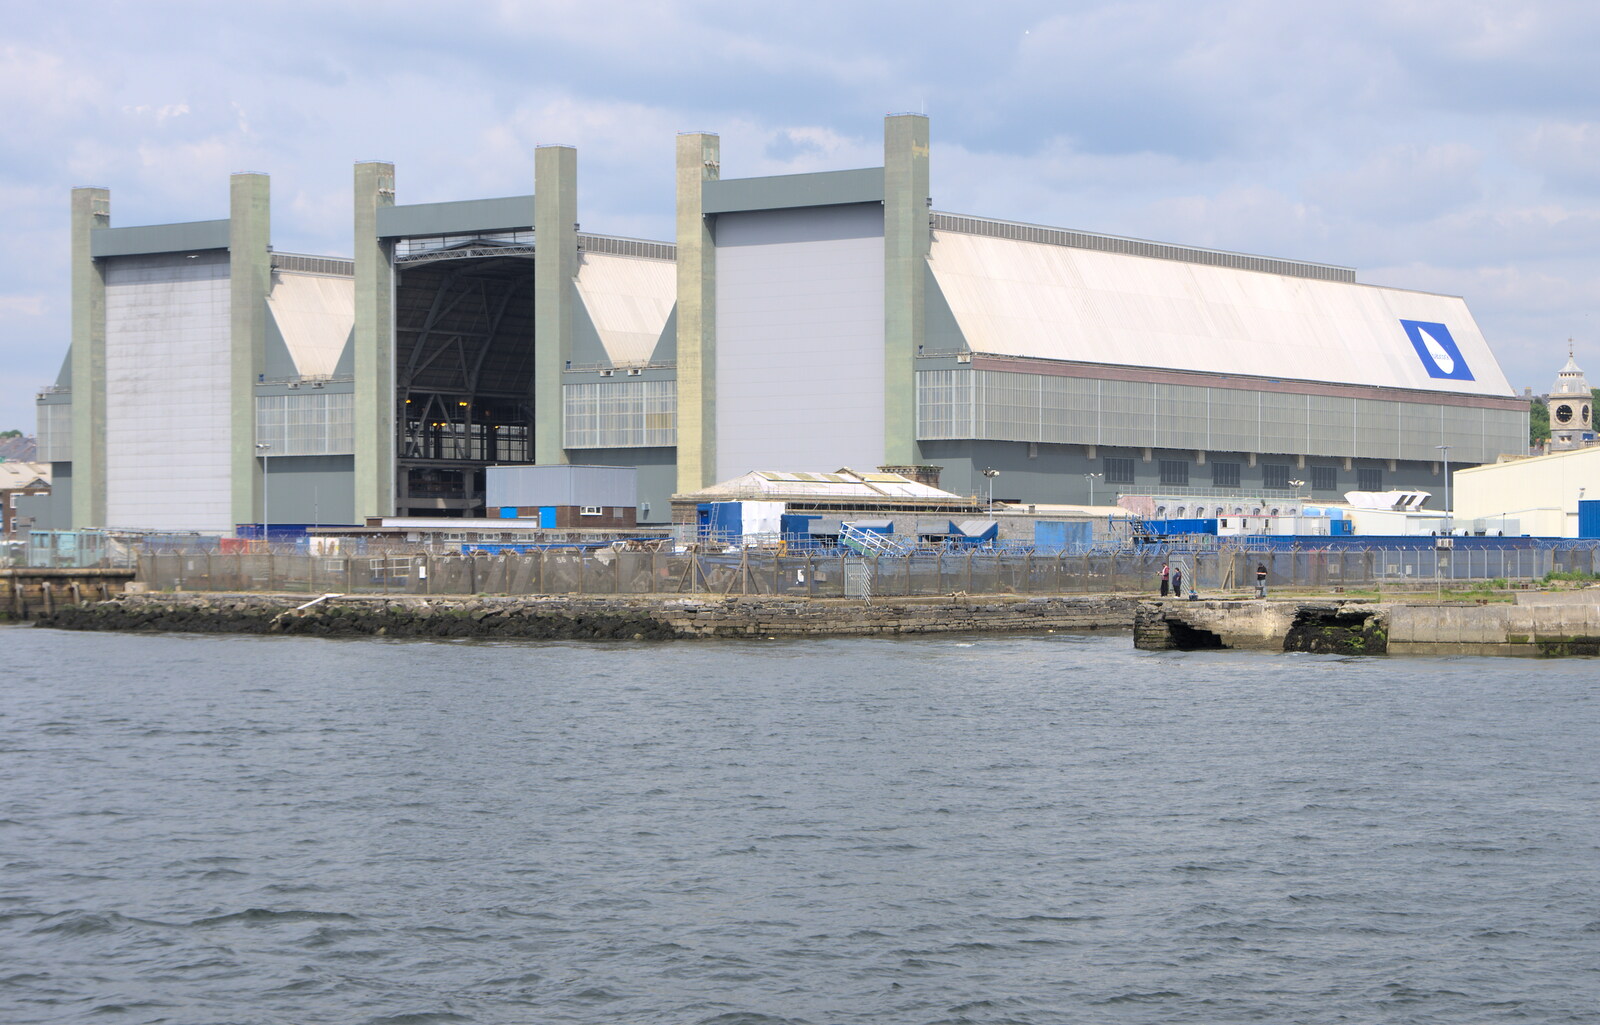 The massive ship sheds at Devonport from A Tamar River Trip, Plymouth, Devon - 30th May 2016